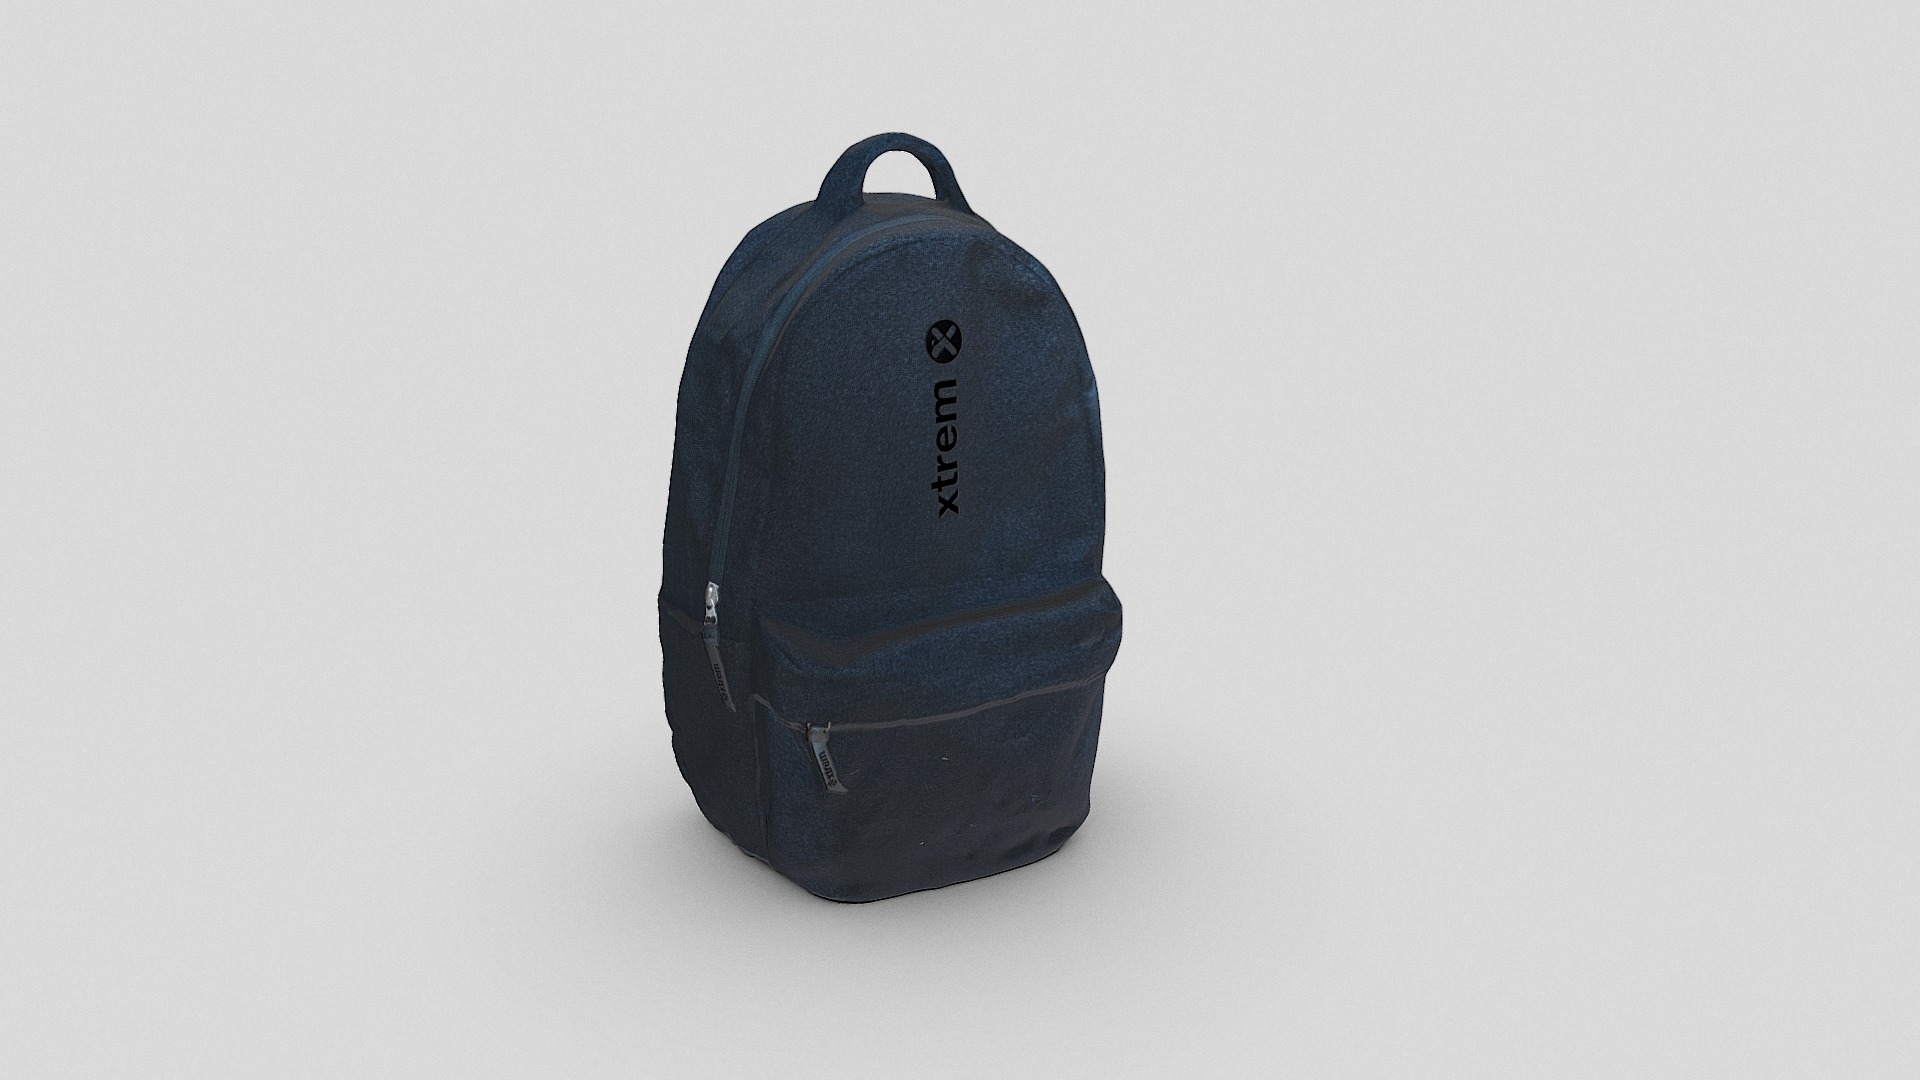 3D model Backpack Scan – Xtreme Model - This is a 3D model of the Backpack Scan - Xtreme Model. The 3D model is about a black backpack with a strap.